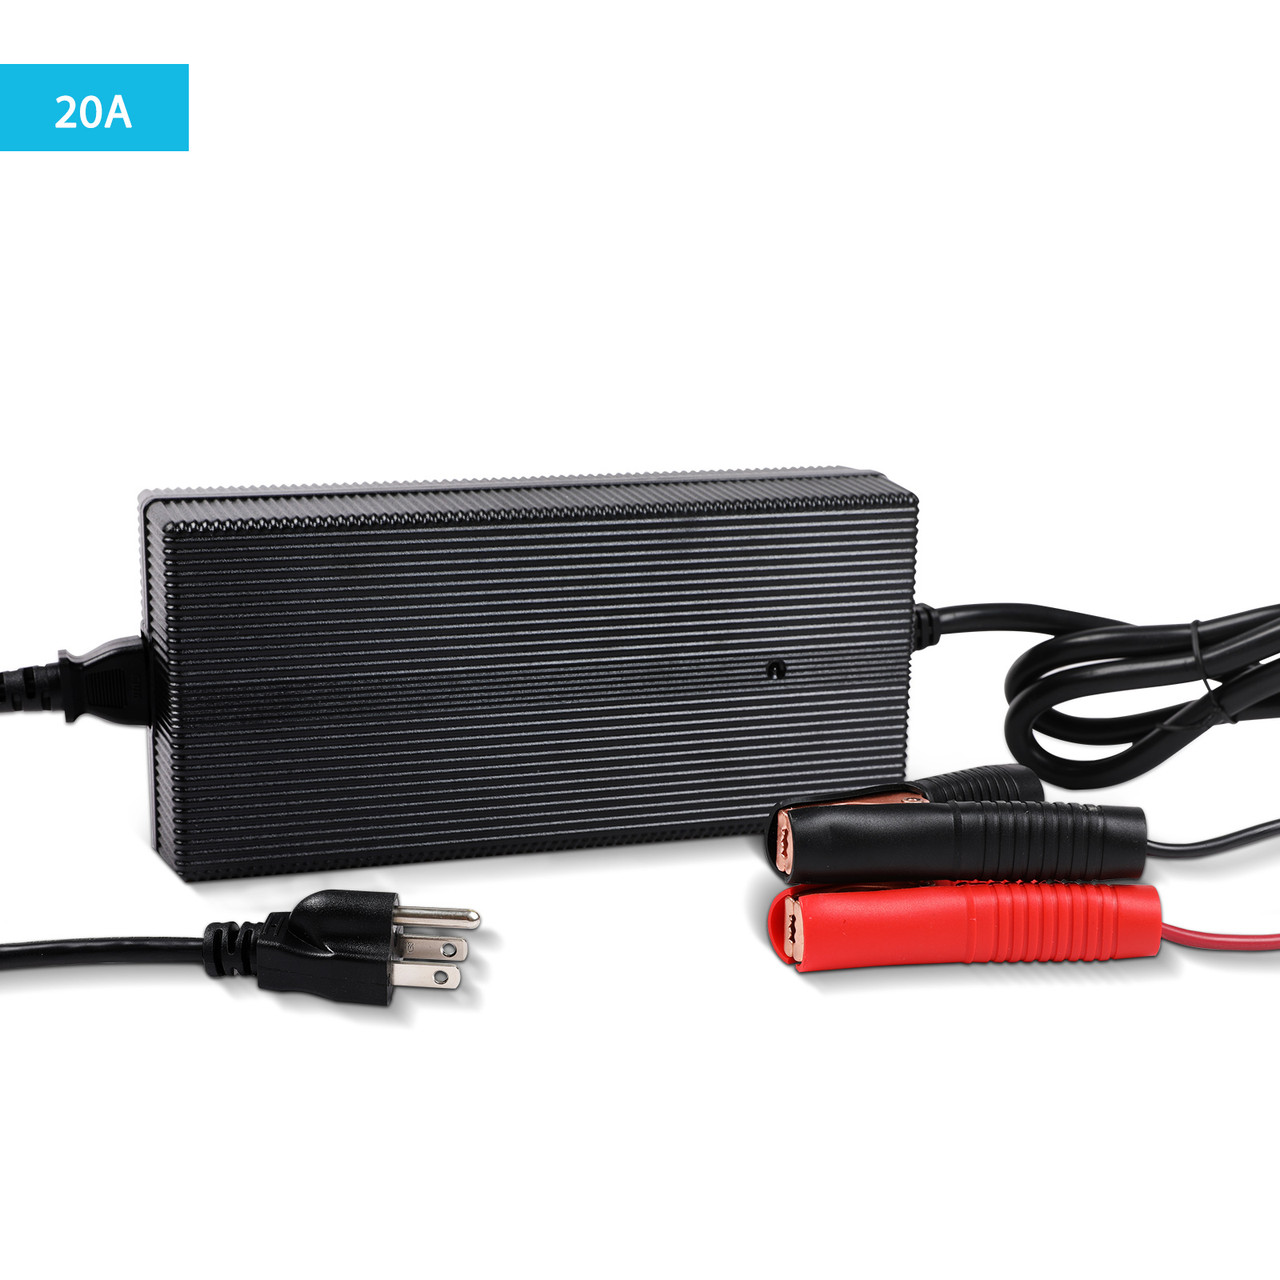 20A AC-to-DC LFP Portable Battery Charger | Renogy